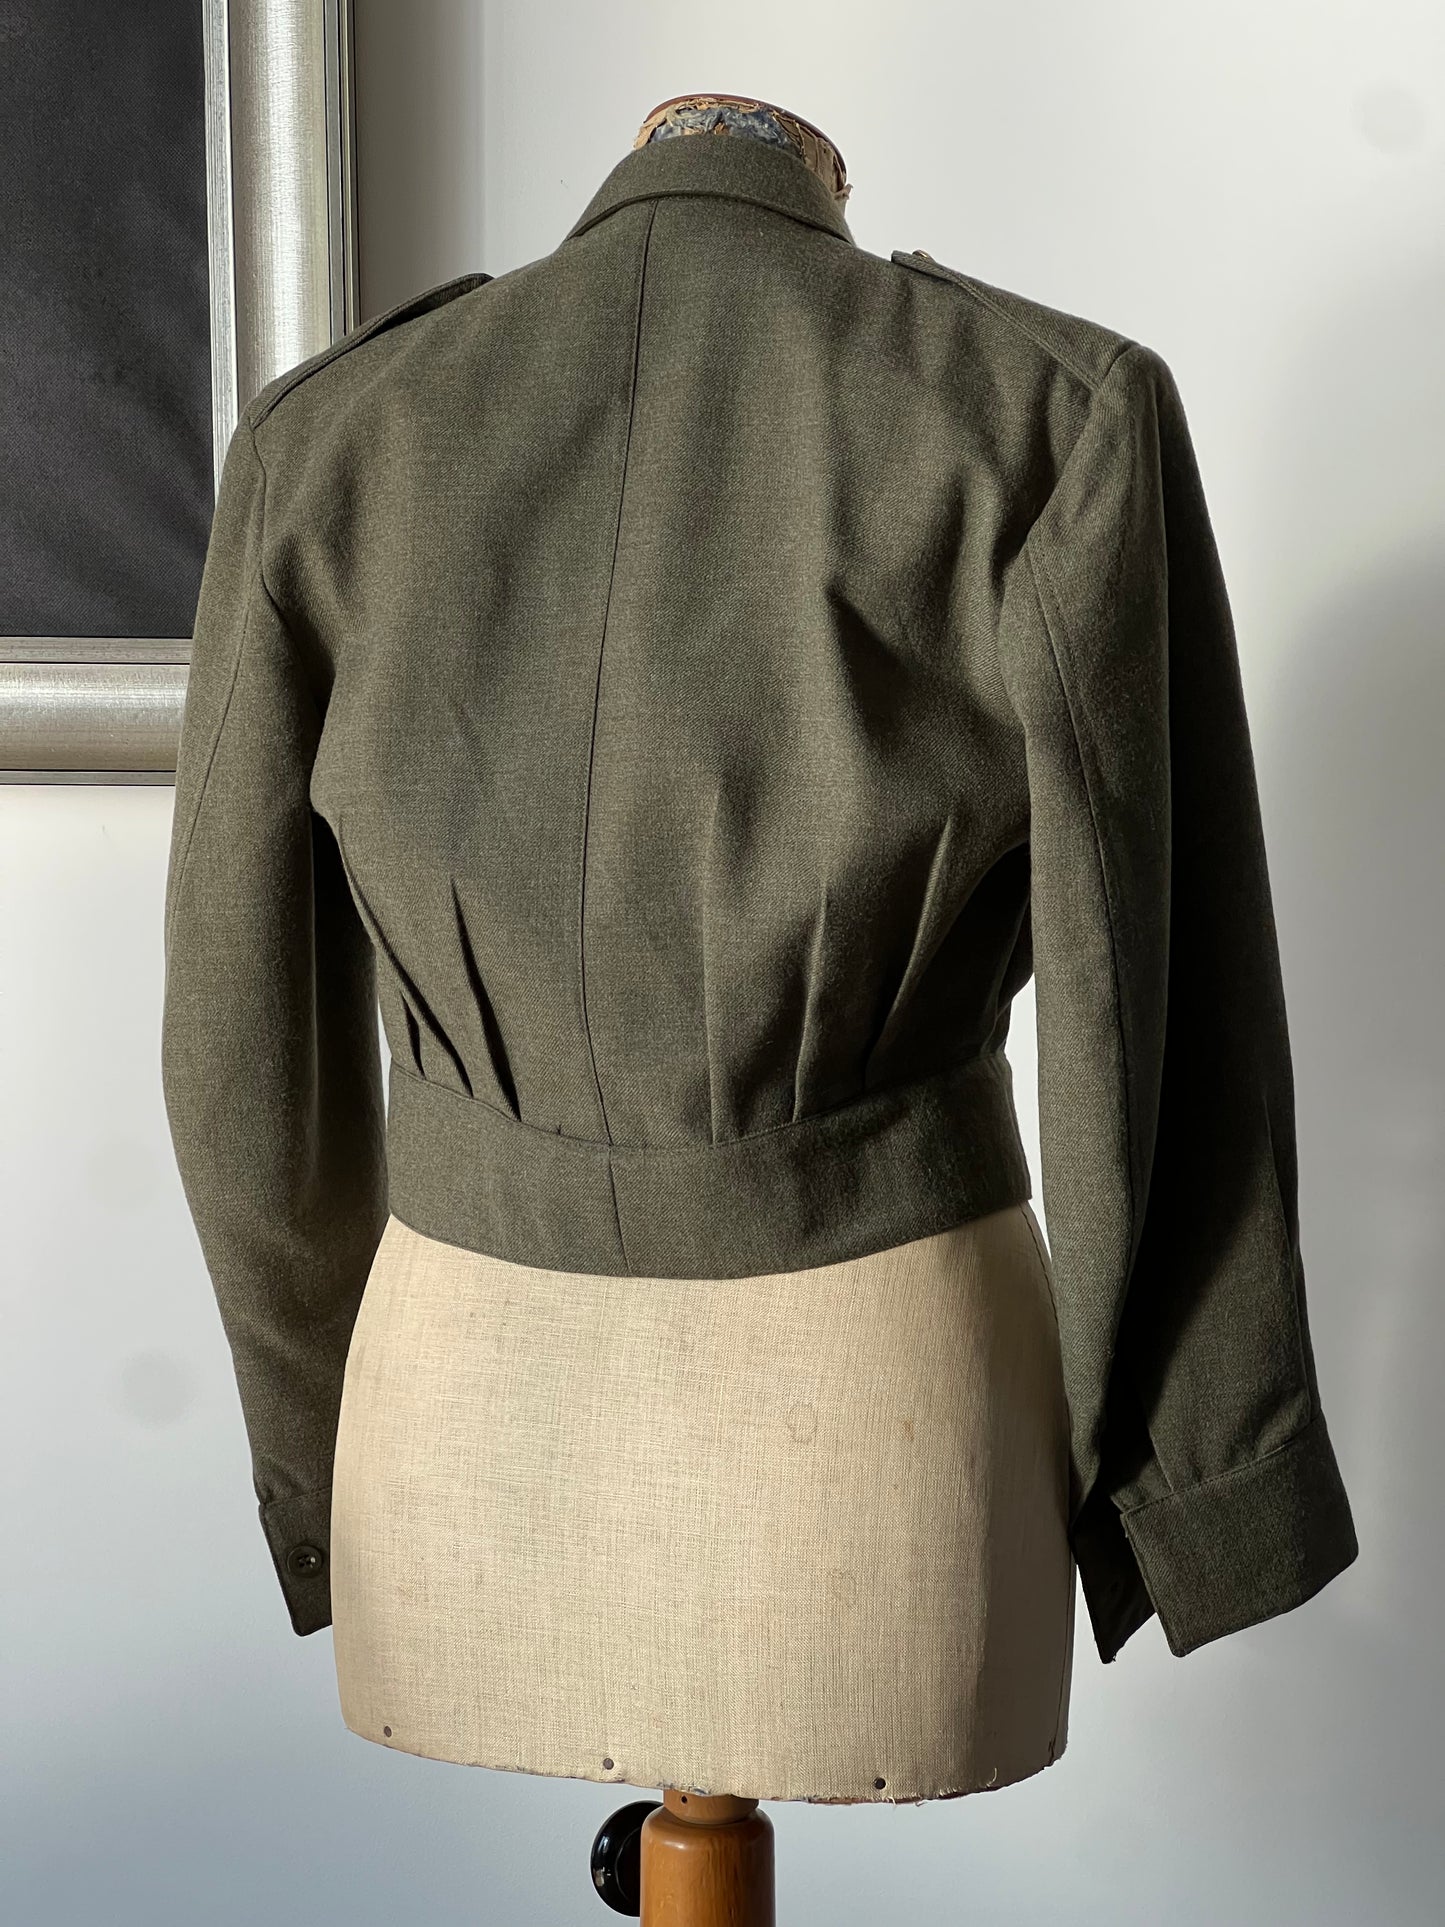 The back of army women’s jacket on a mannequin